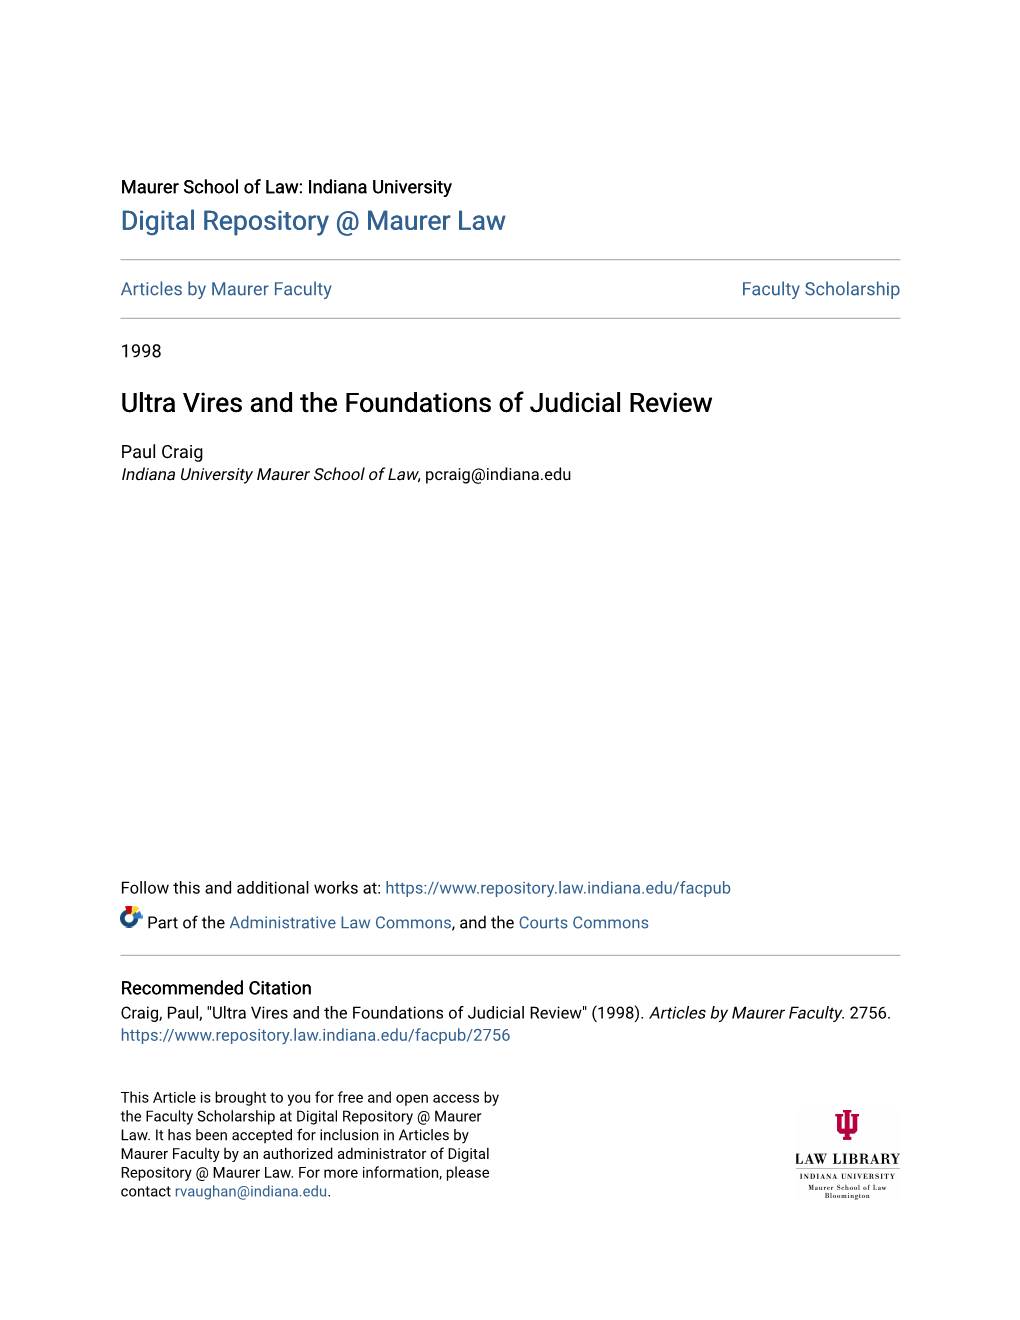 Ultra Vires and the Foundations of Judicial Review